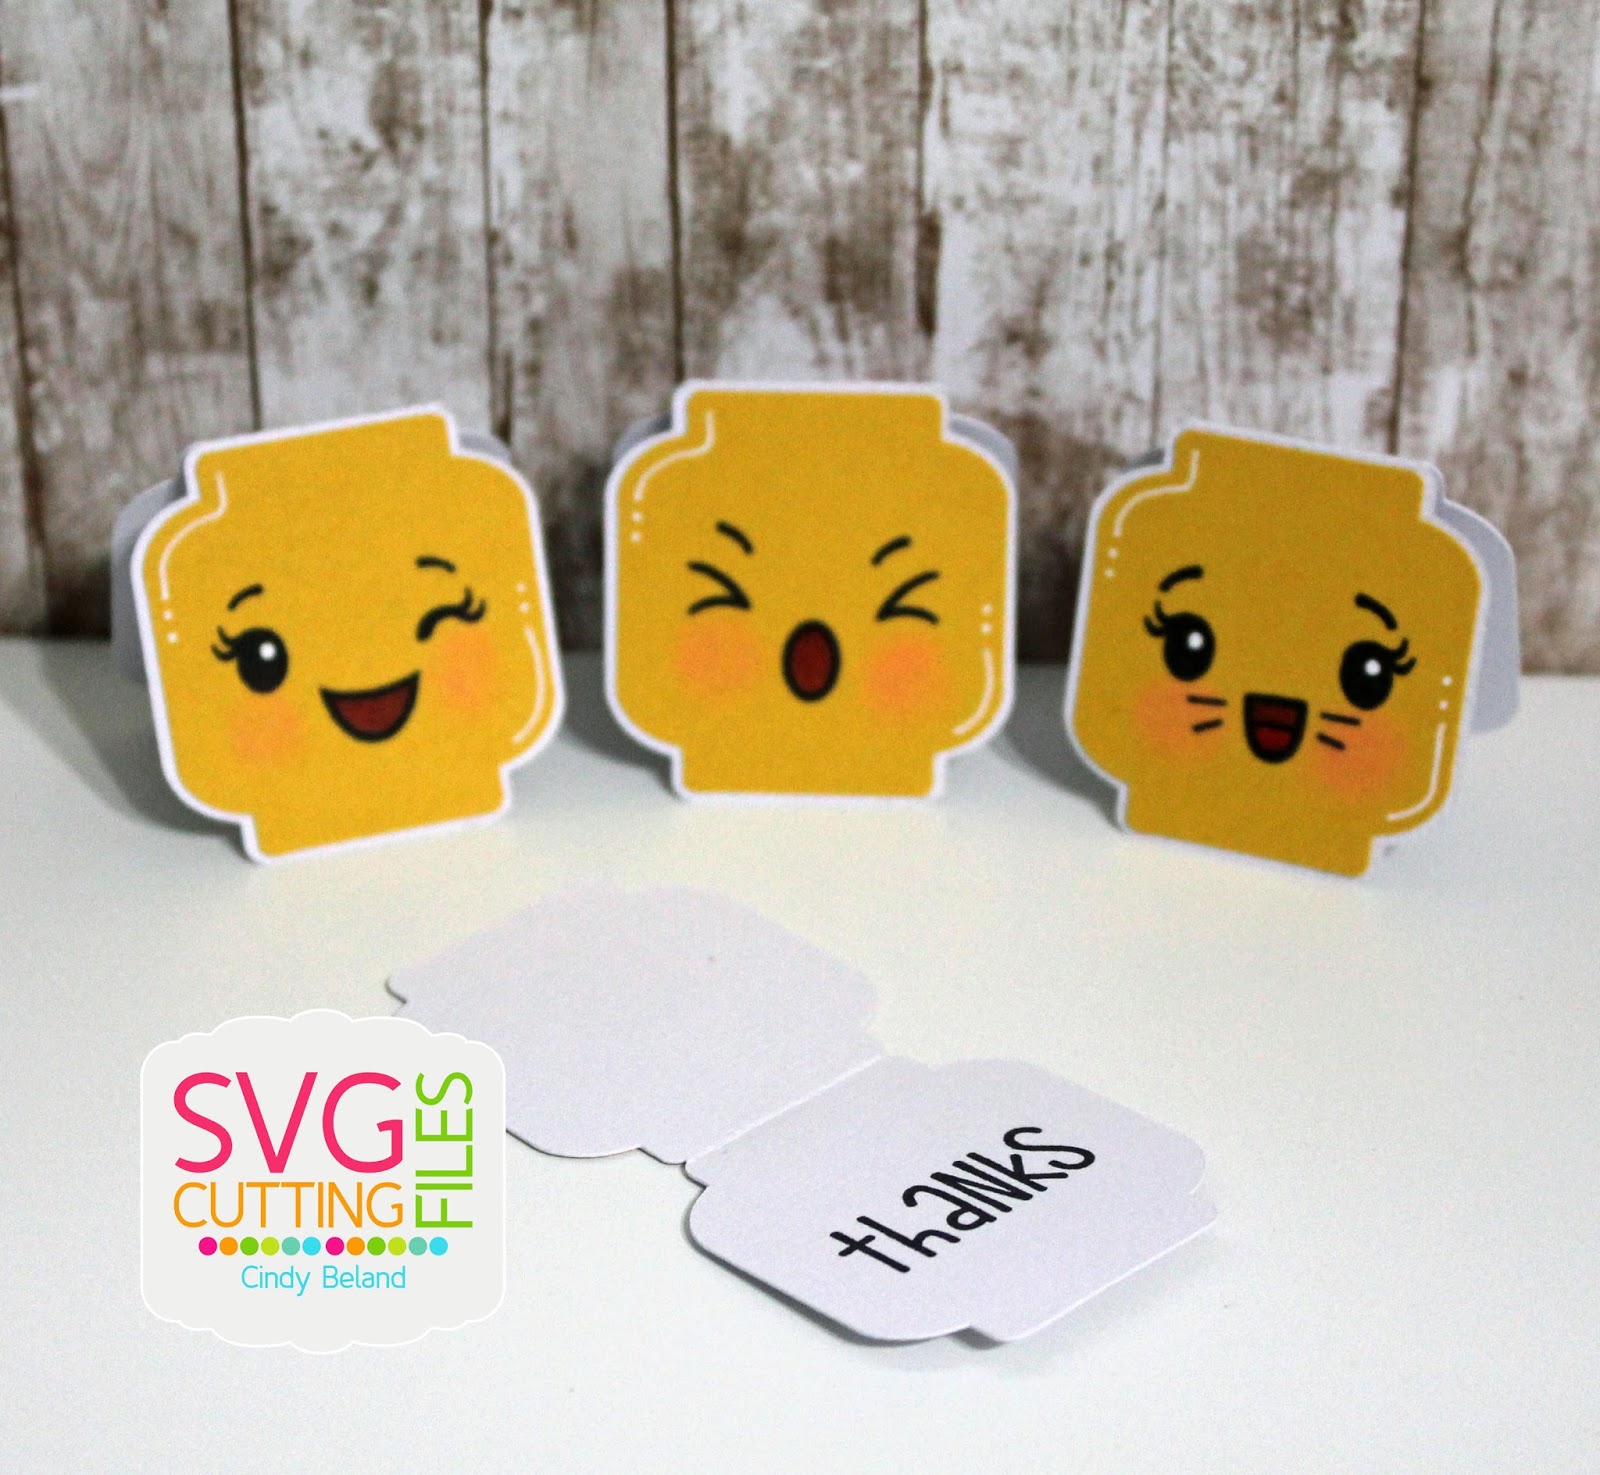 Download SVG Cutting Files: Lego Cards!!!! :)